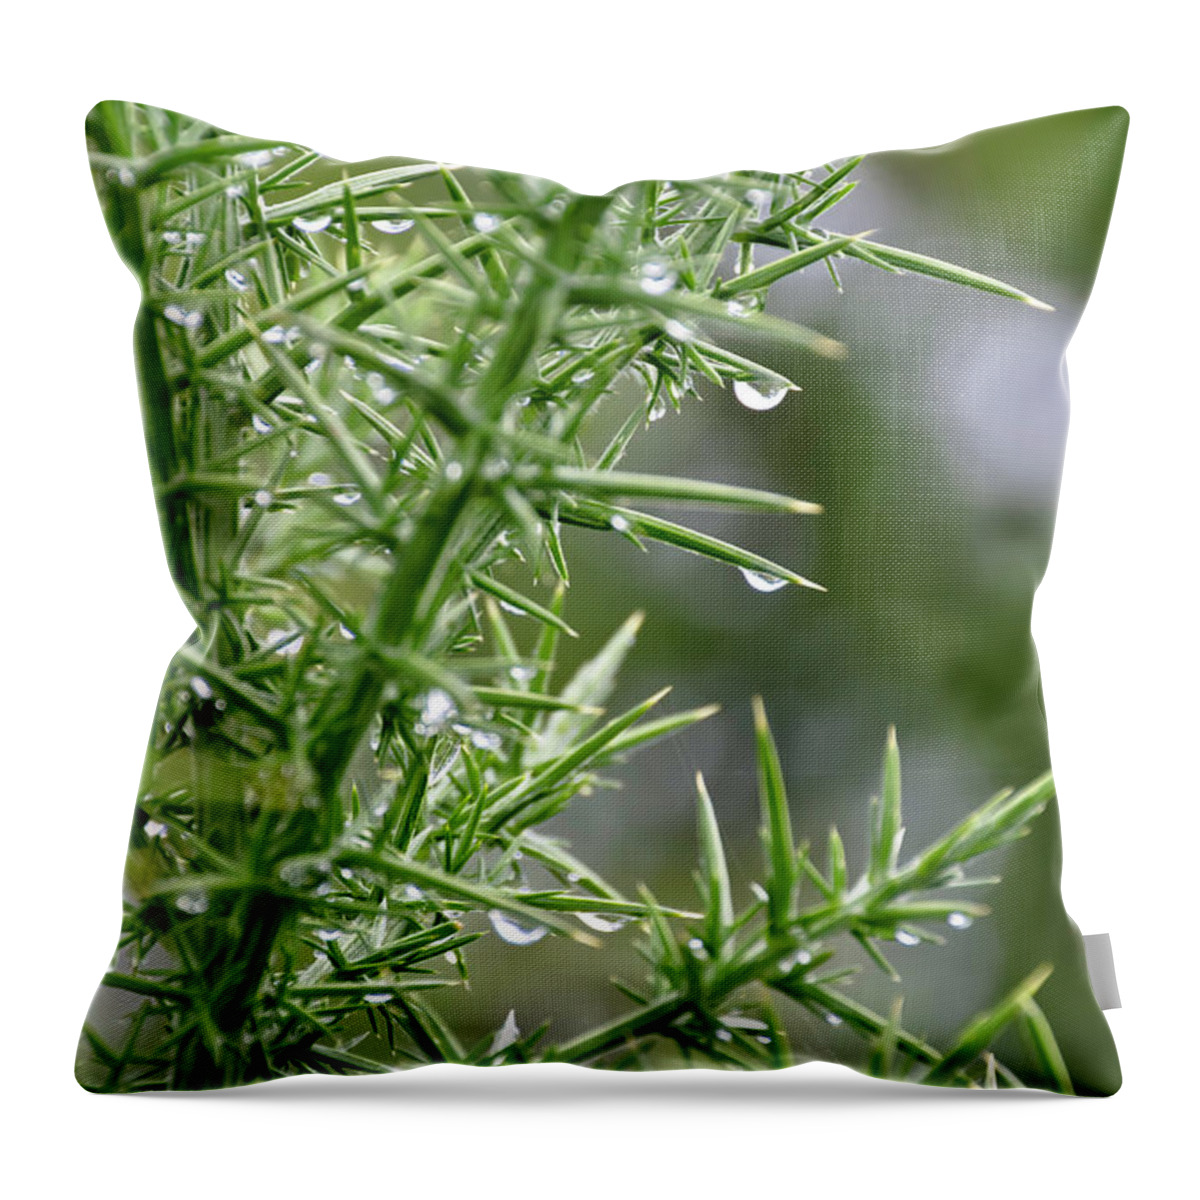 Botanical Throw Pillow featuring the photograph Botanical Beauty by Yurix Sardinelly